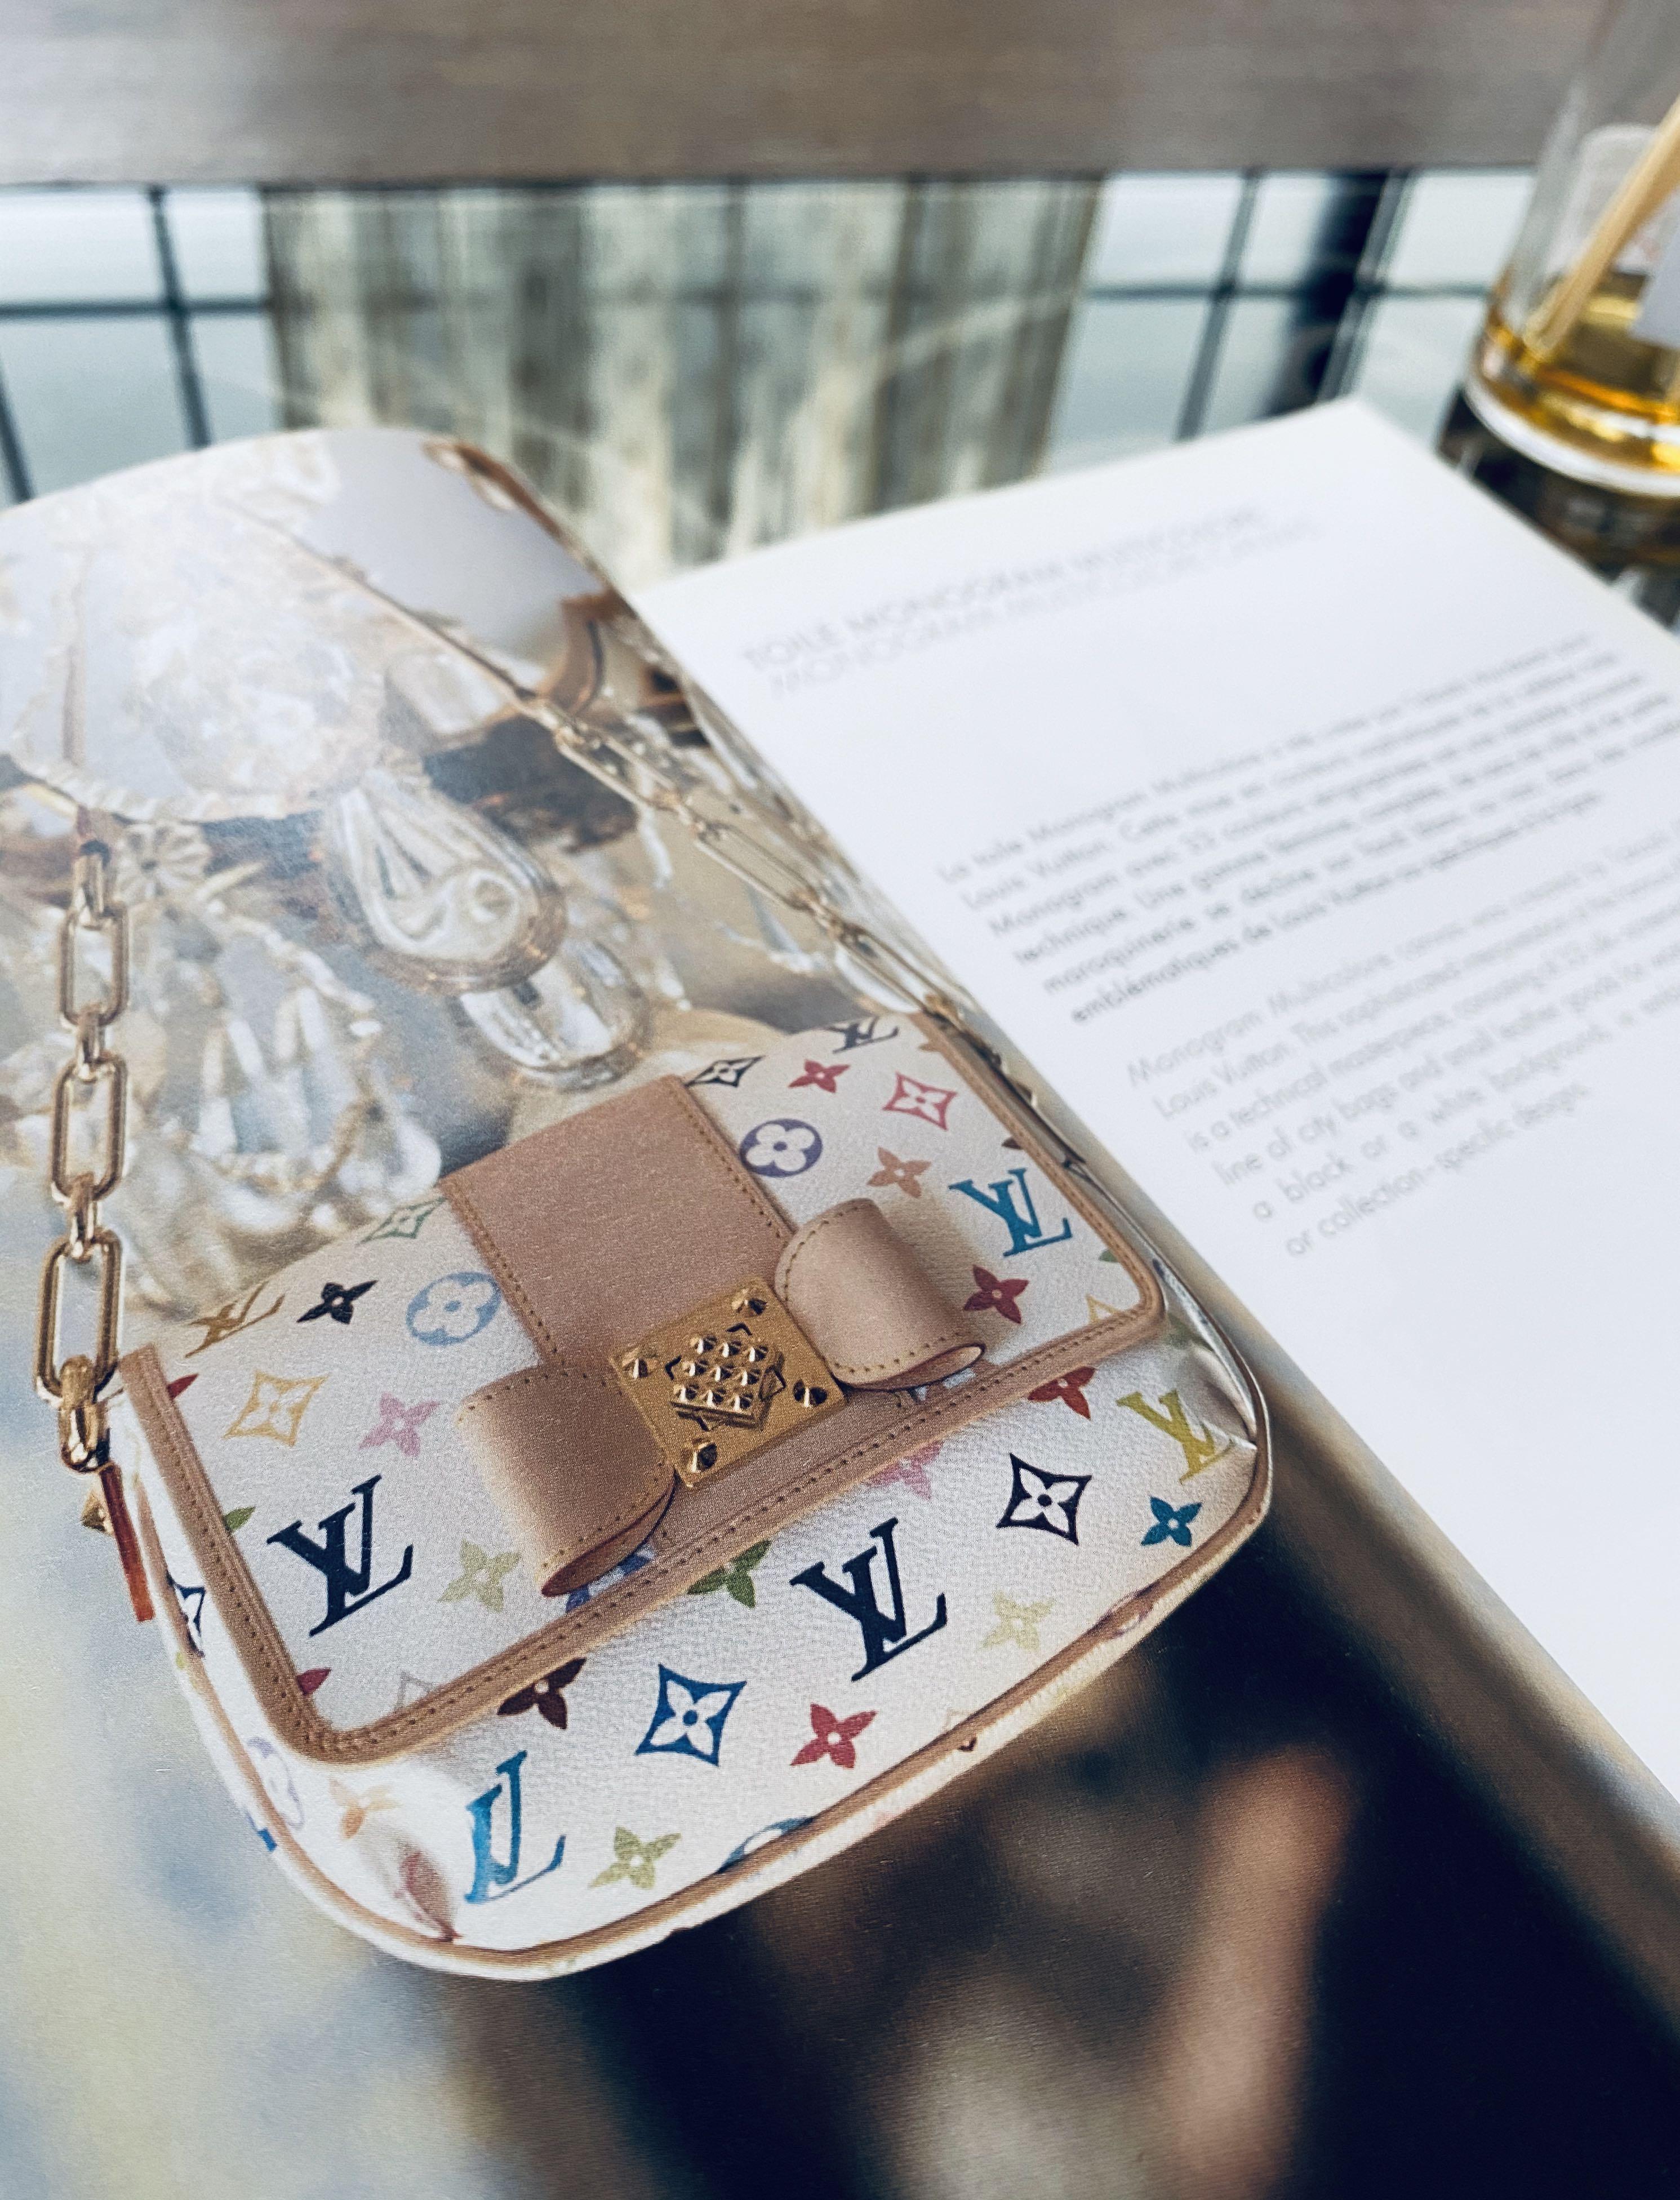 Louis Vuitton Comprehensive Bags & Accessories Catalogue. Beautiful LV Coffee Table Book., Women ...